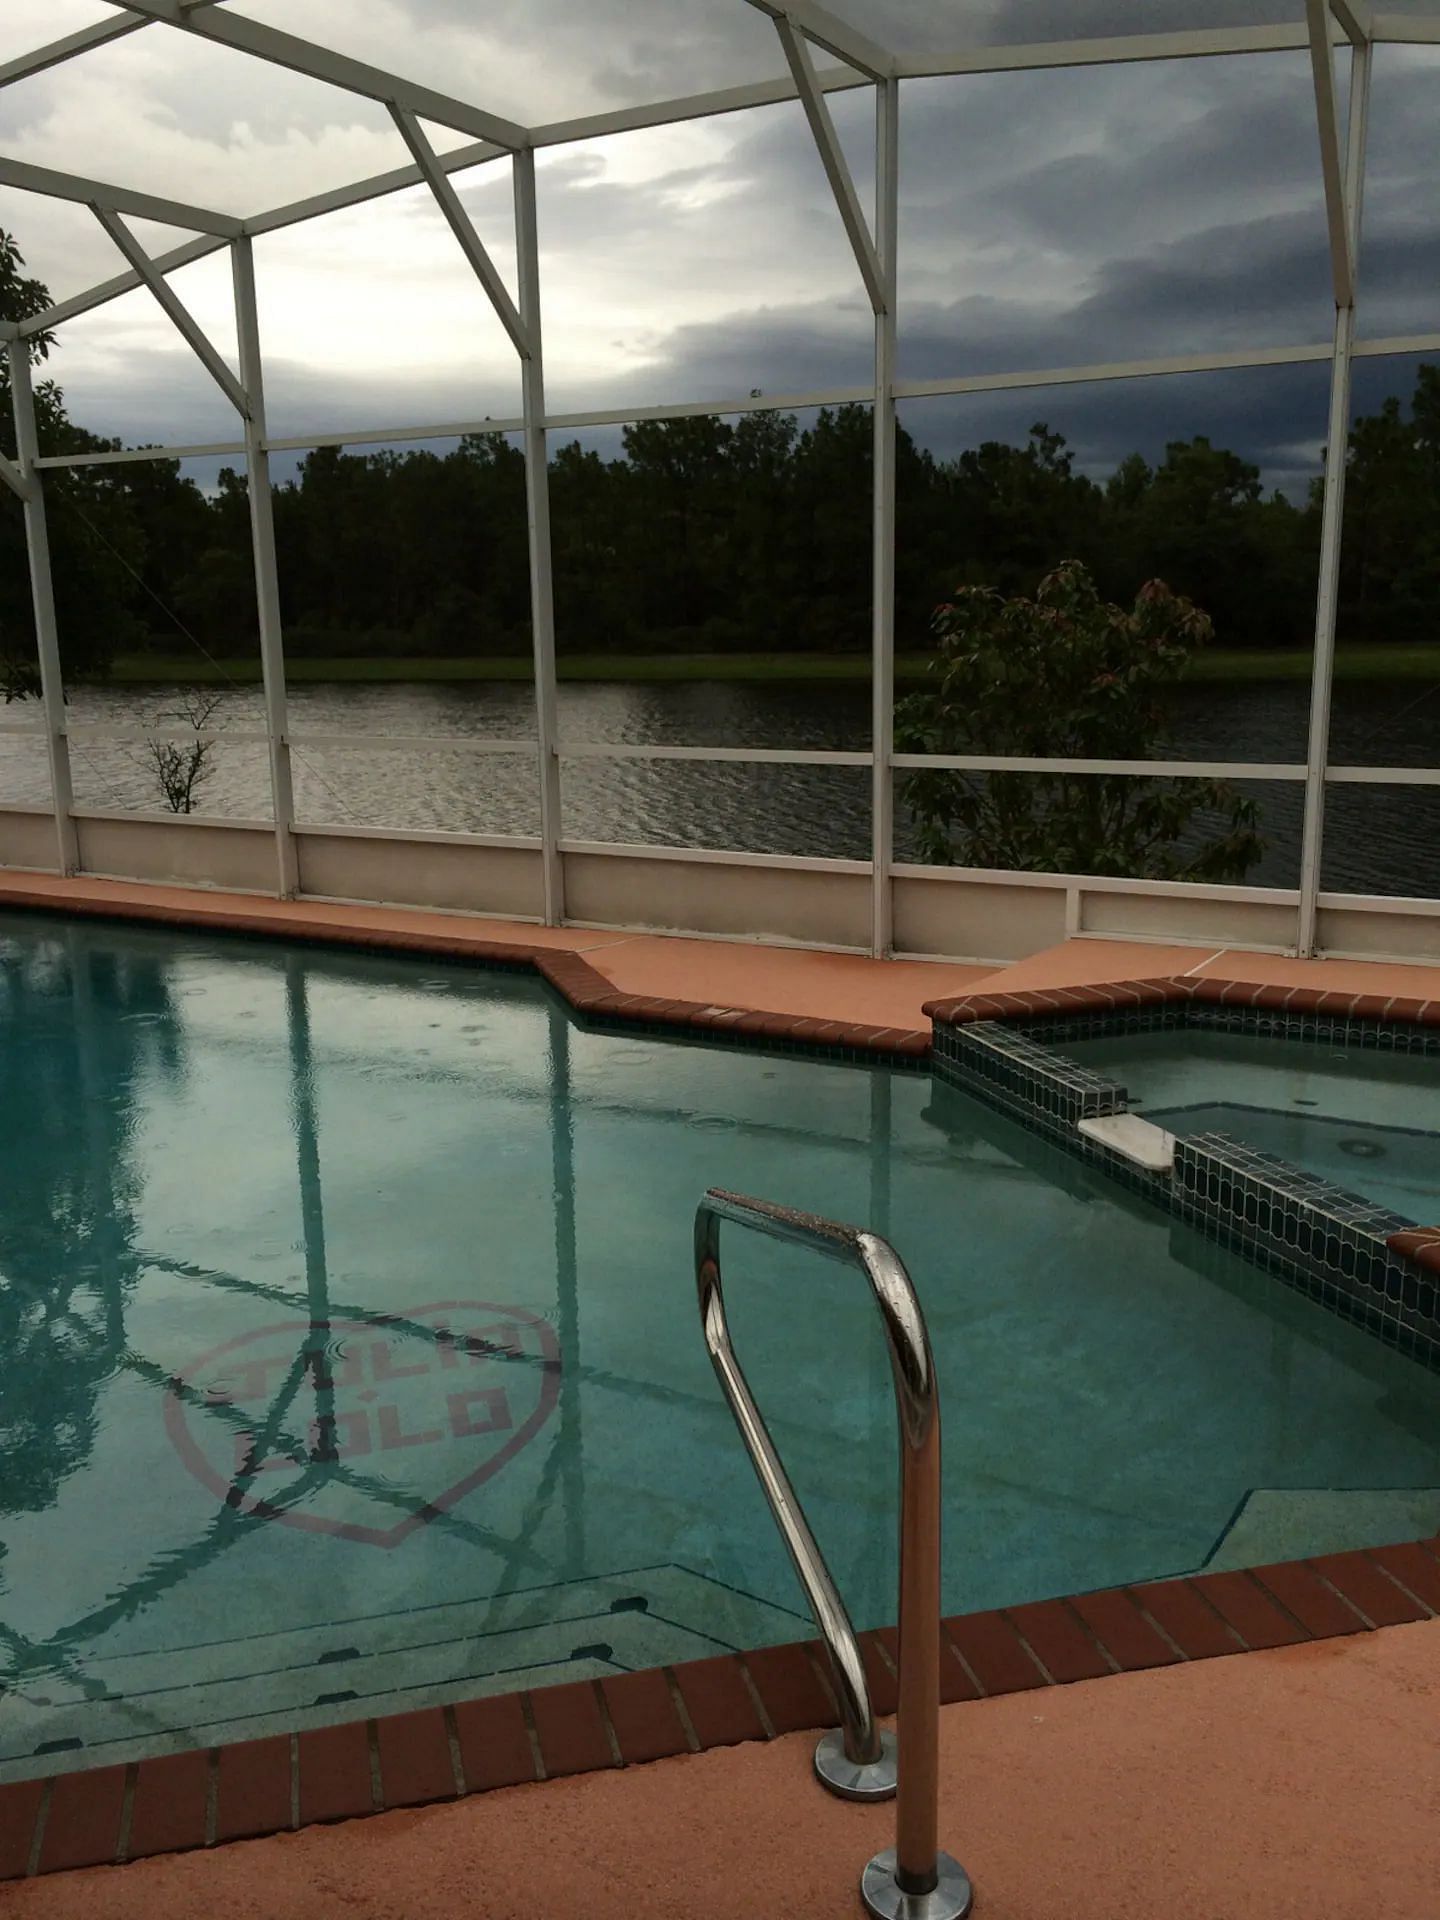 JWguest House at Orlando, Florida | Private Home with Pool, 3 Bd 2 Bath, Close to Disney | Jwbnb no brobnb 33